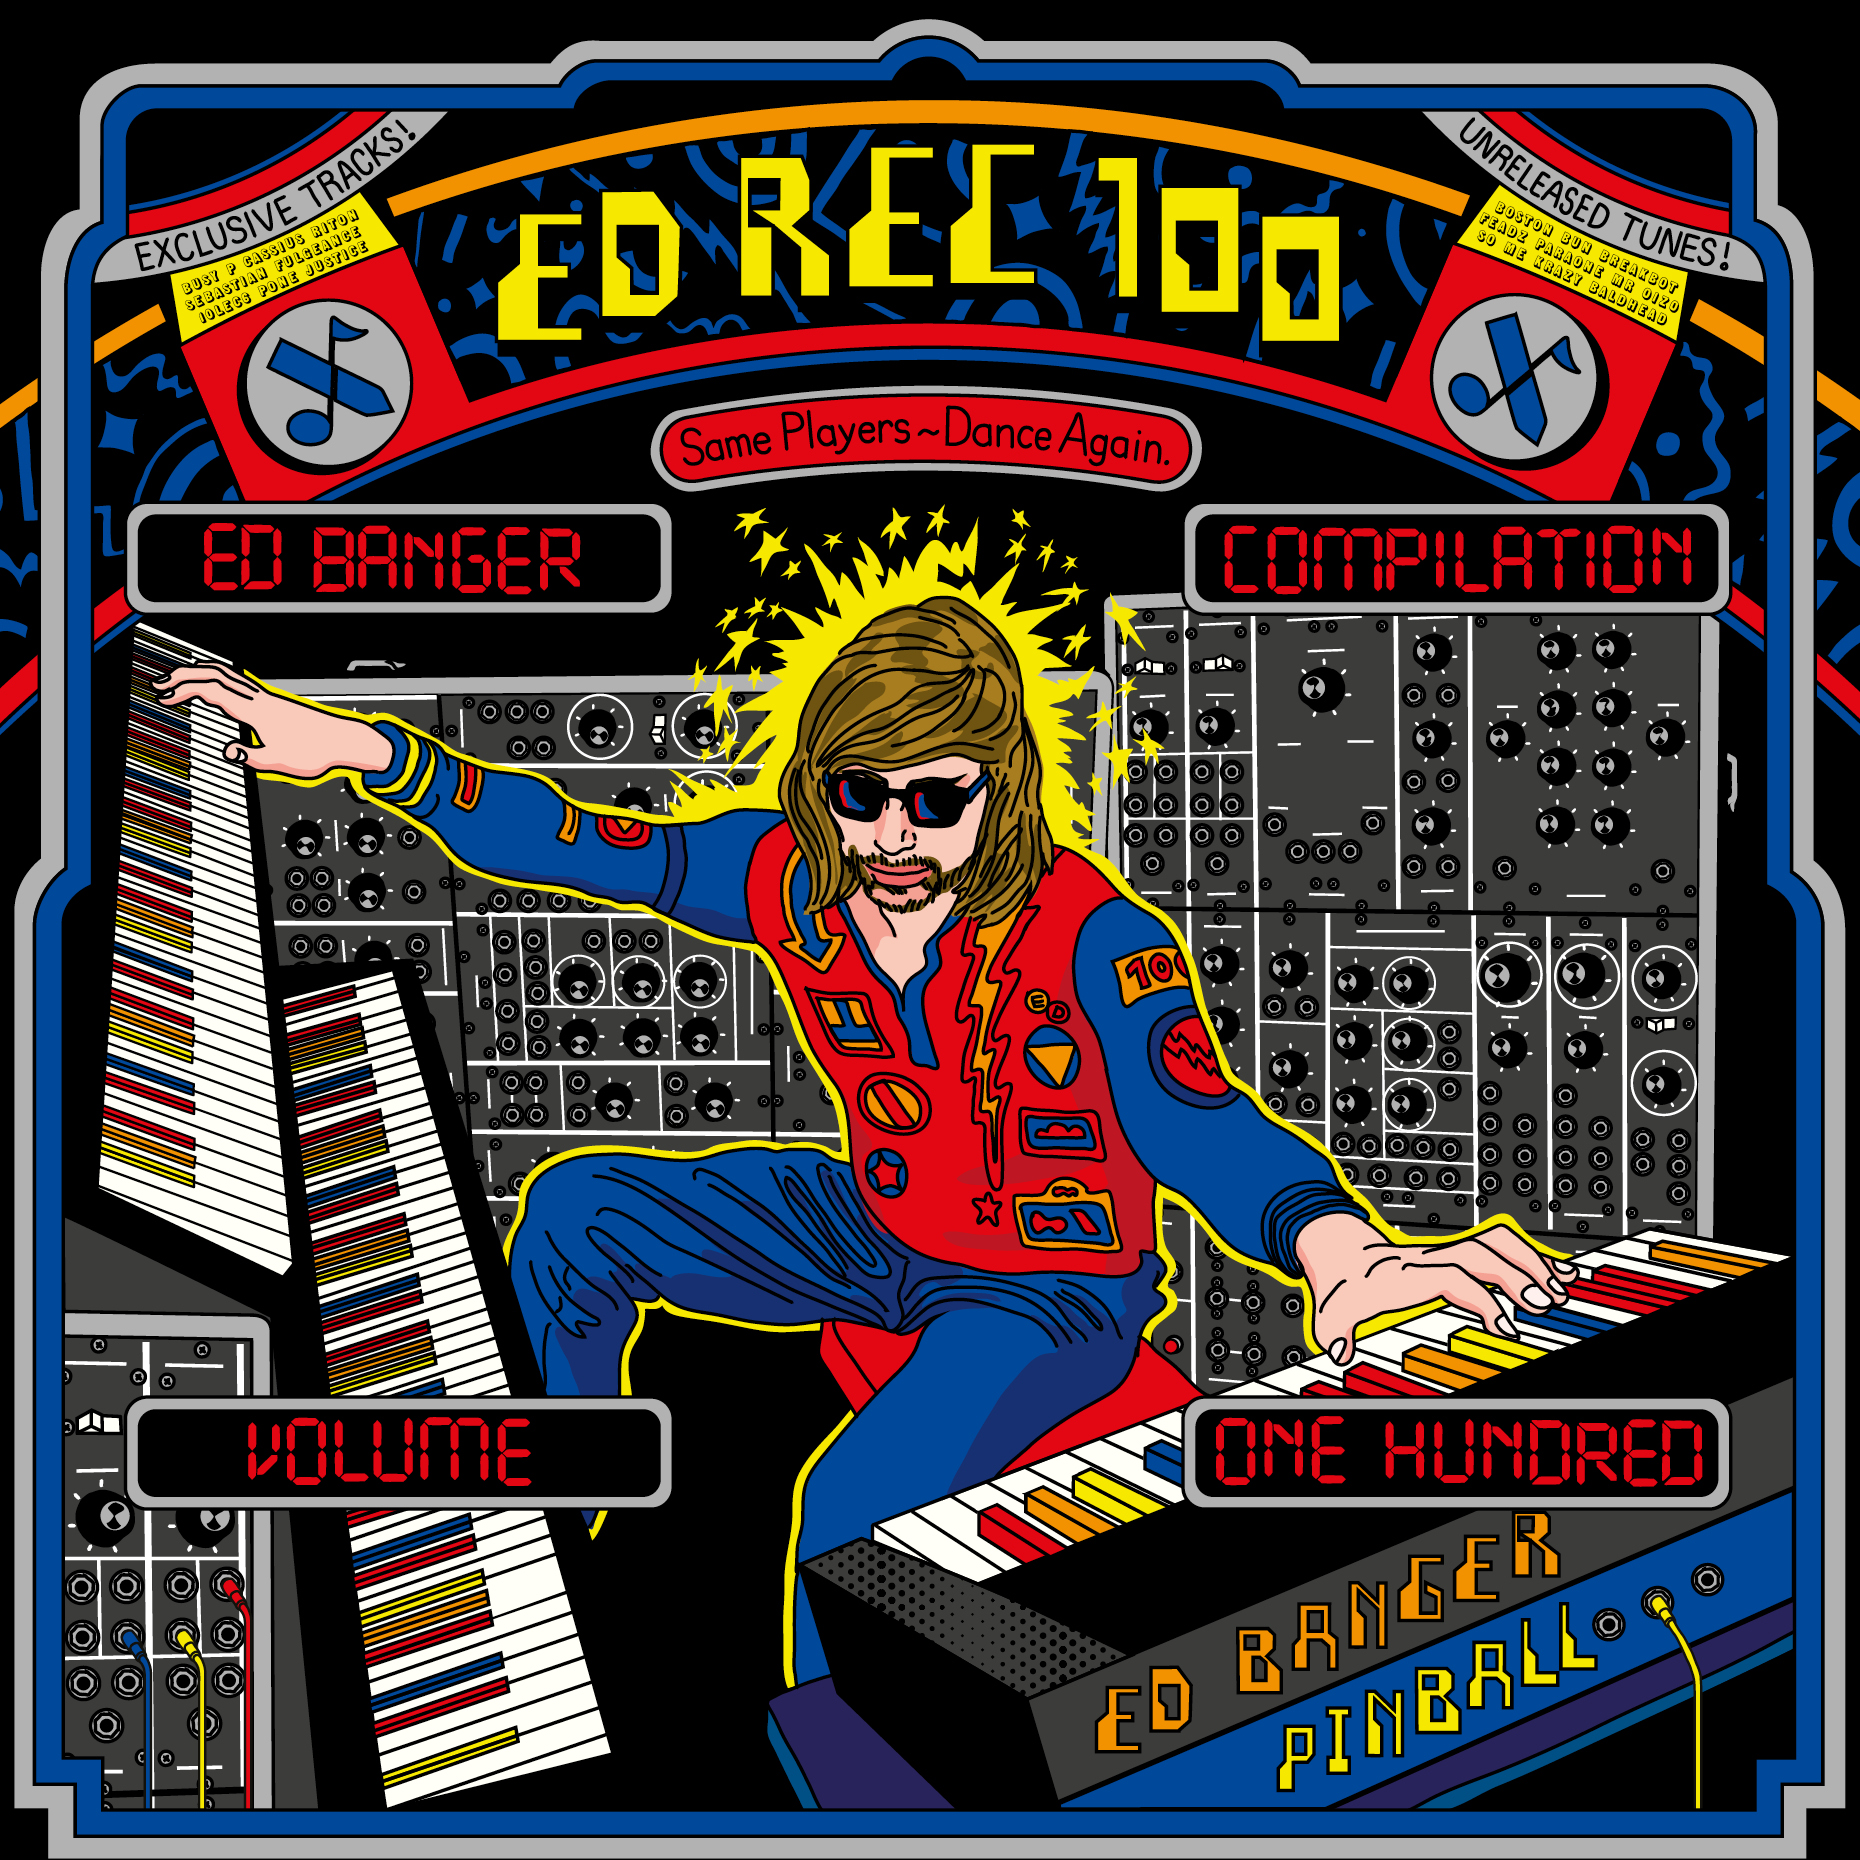 Riton samples Paul McCartney for his contribution to 'Ed Rec 100' - Harder Blogger Faster (blog)